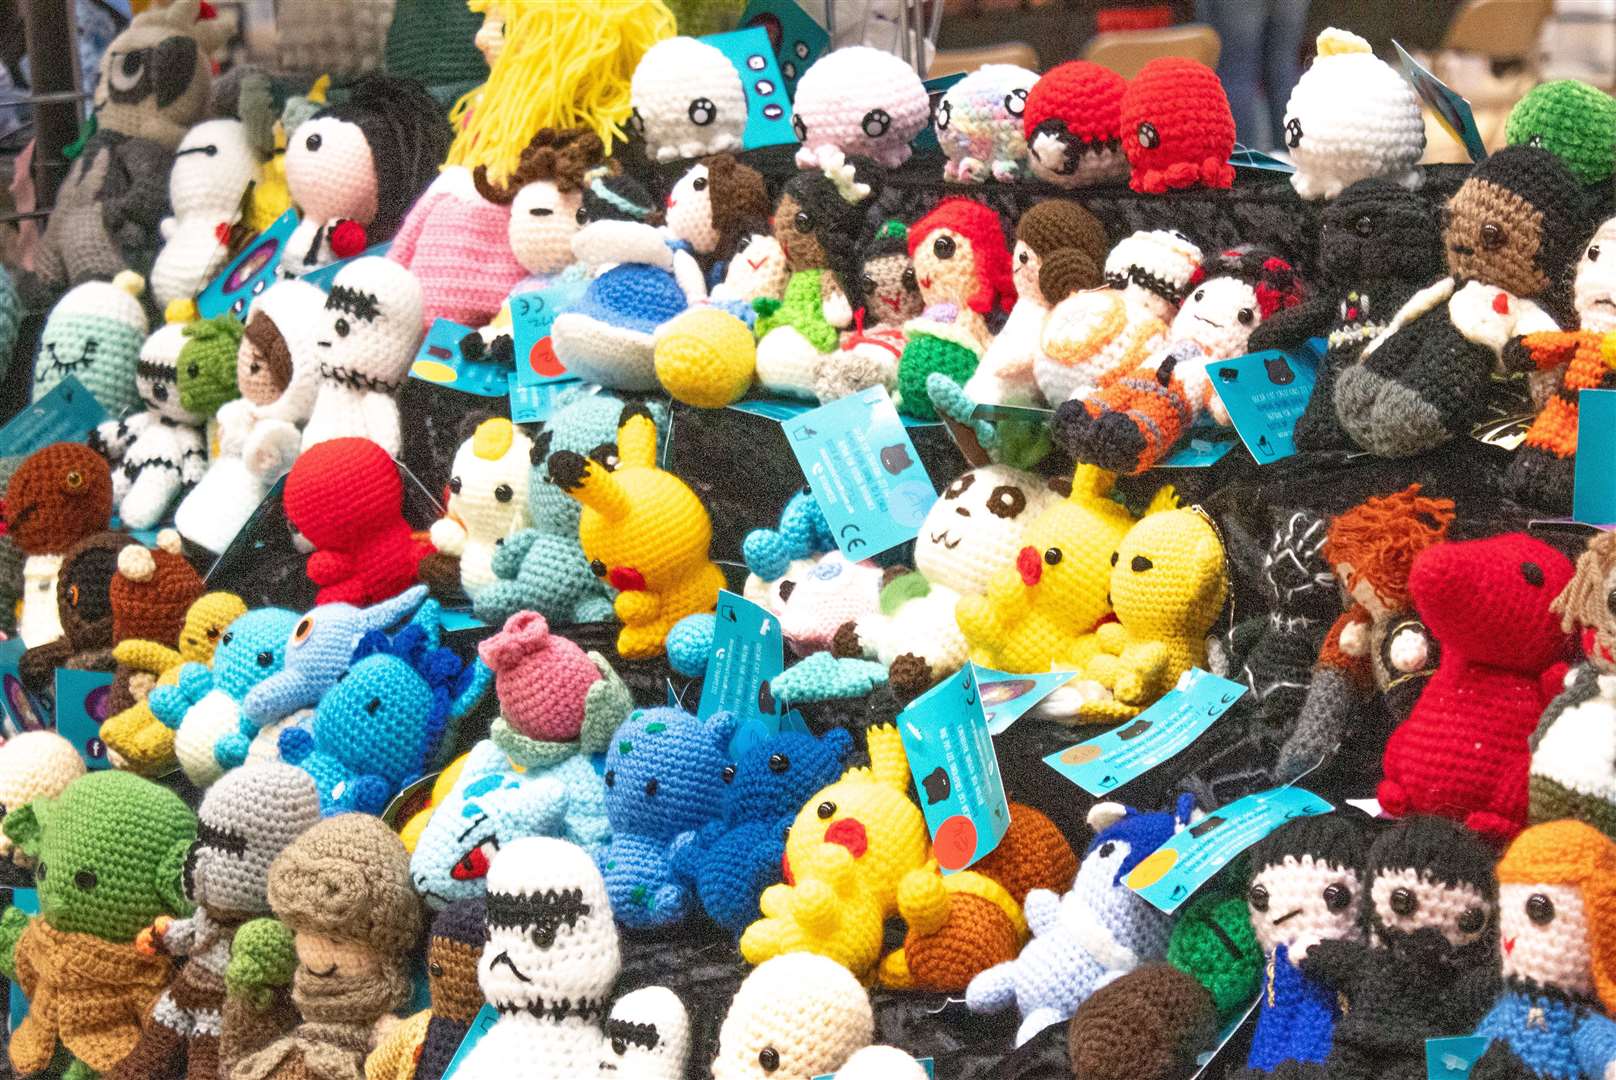 Trade stands at ComiCon featured a wide range of toys and collectables. Photo: Niall Harkiss